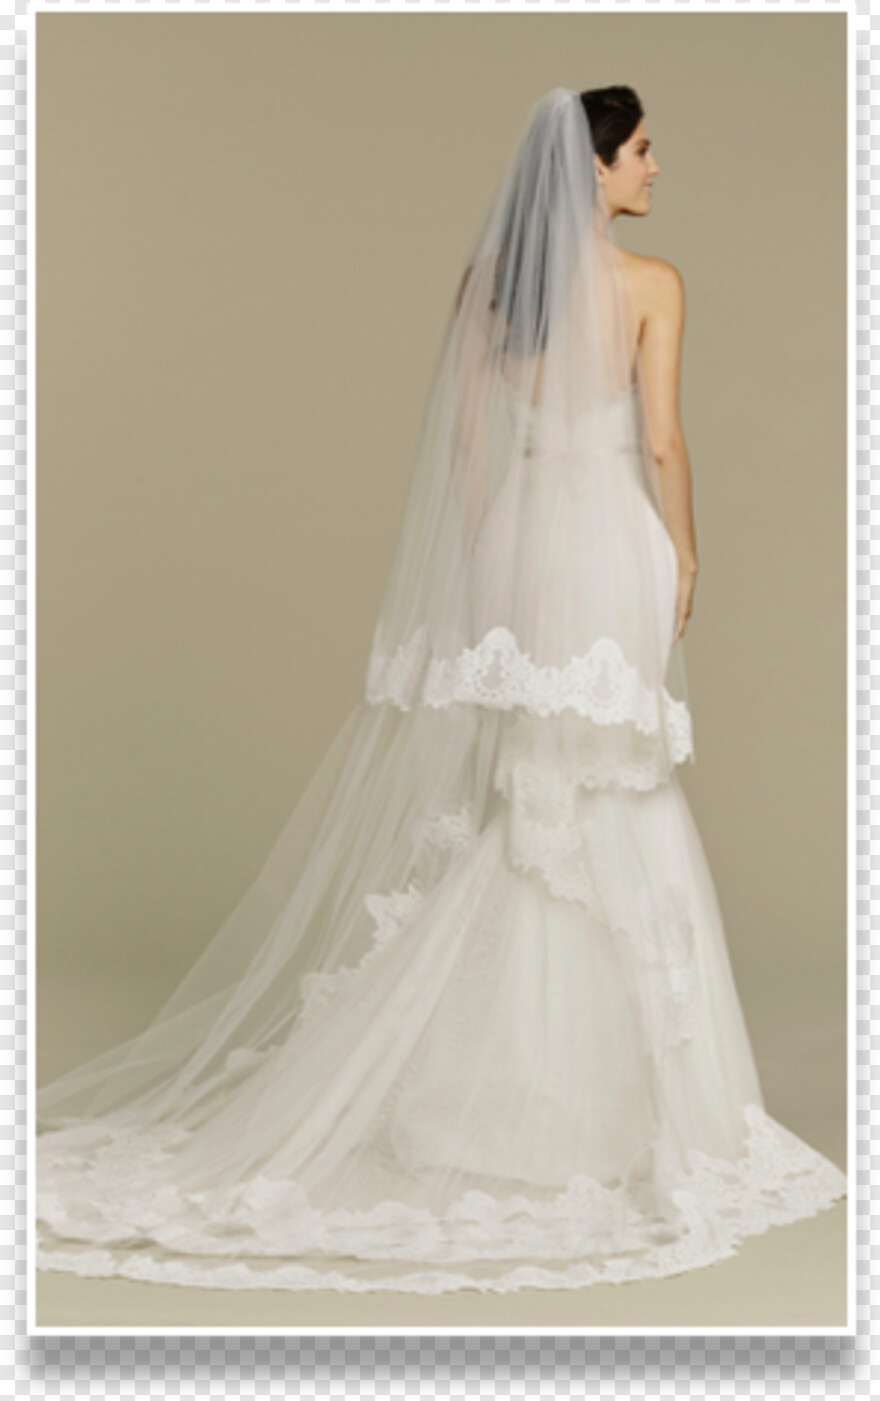 lace-frame # 390232